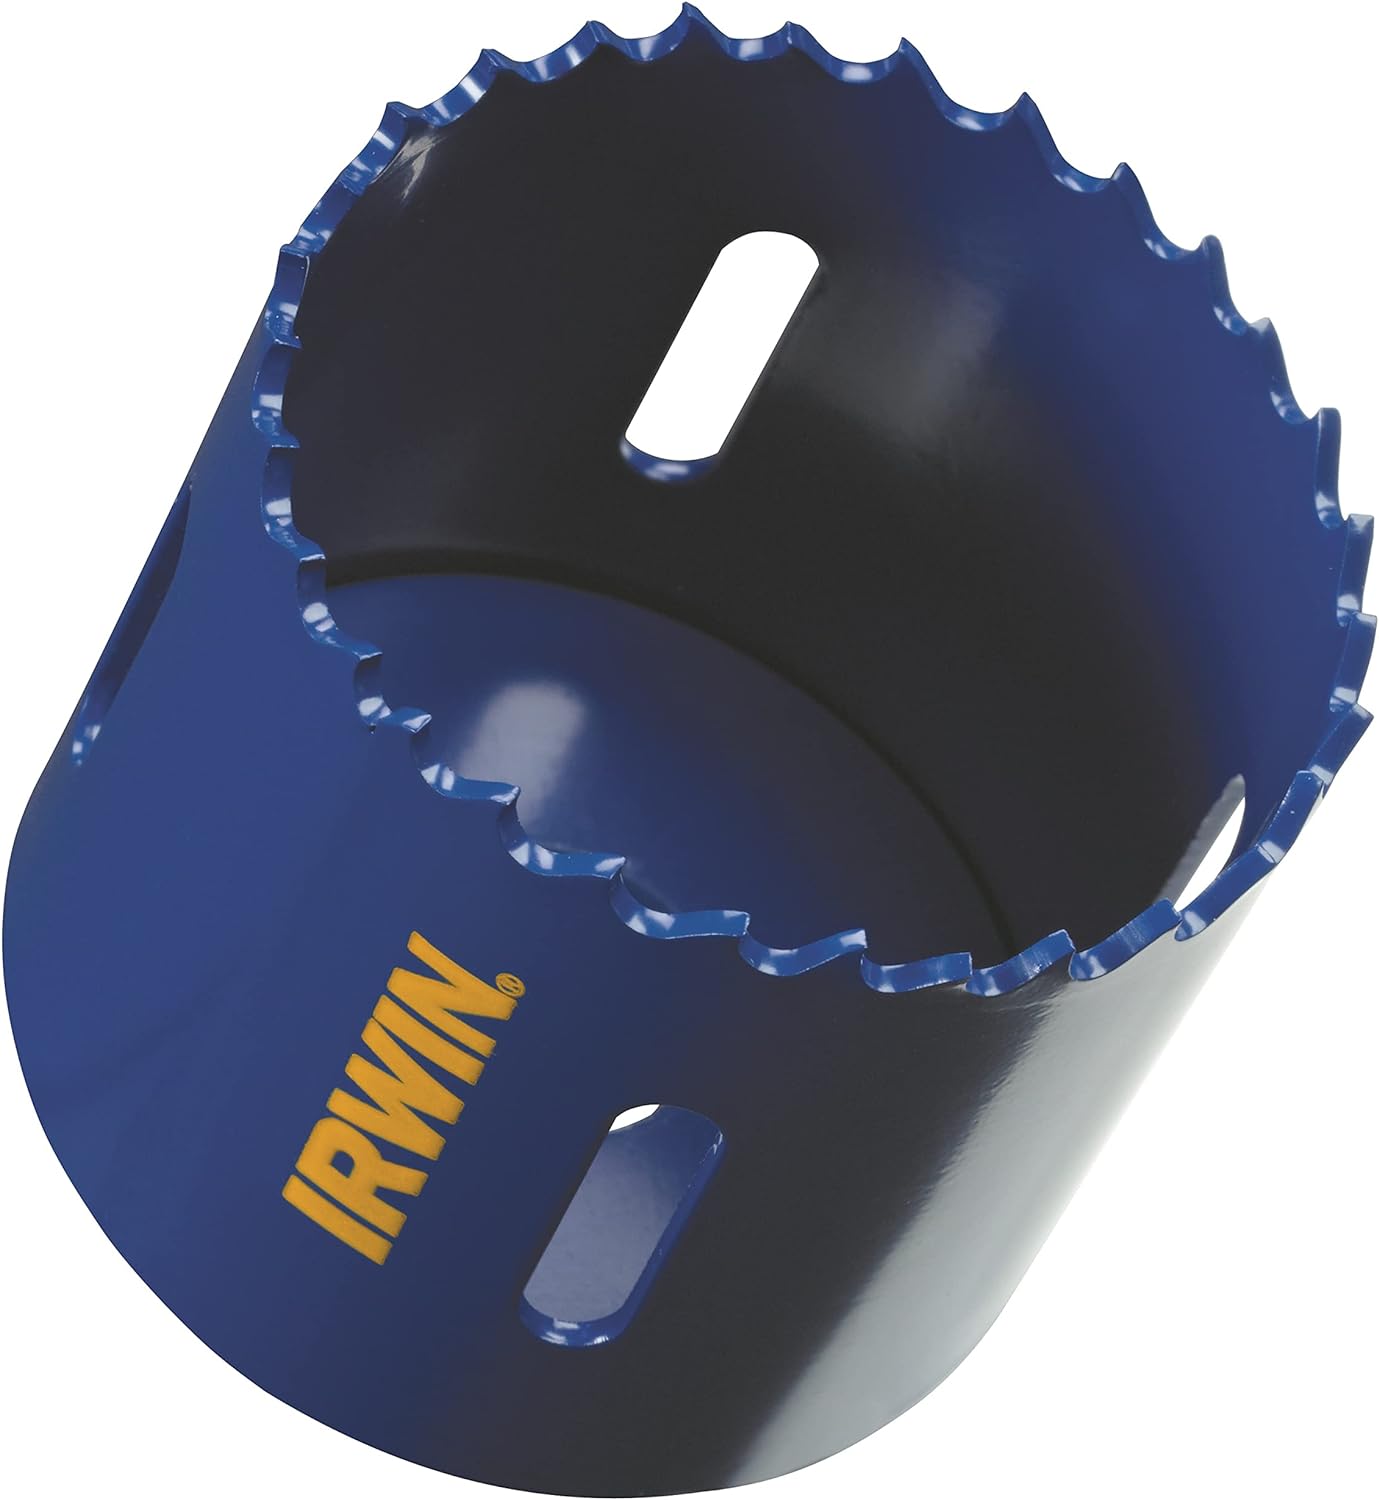 Irwin 7 Pieces Bi-Metal Hole Saw Set - 400SE | Supply Master, Accra, Ghana Hole Saws & Cores Buy Tools hardware Building materials